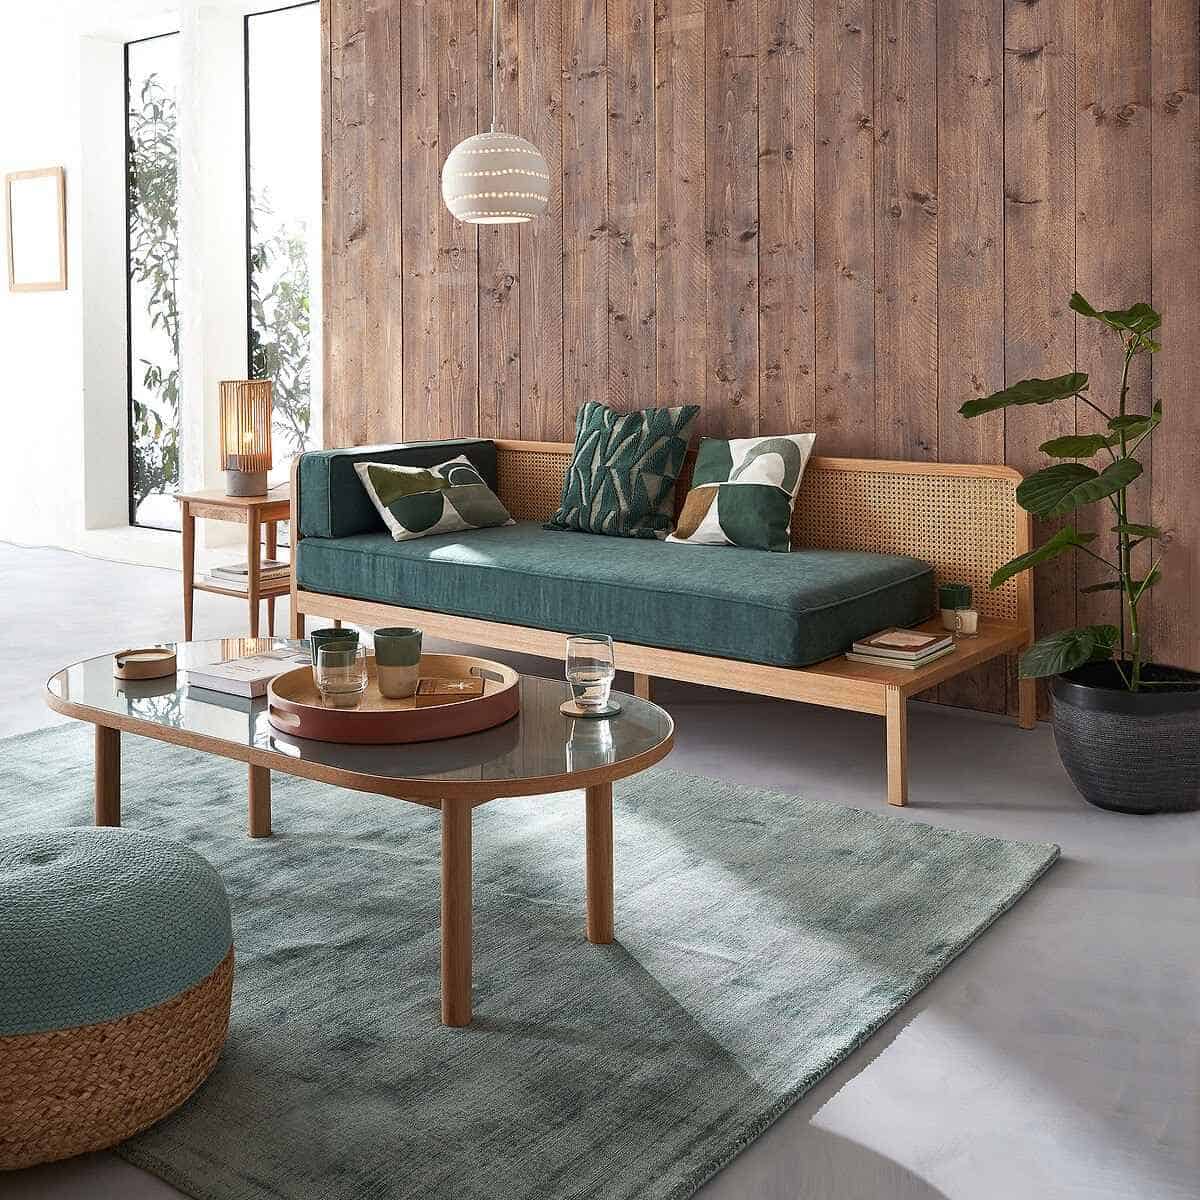 brown walls in a living room with green rug and wooden sofa